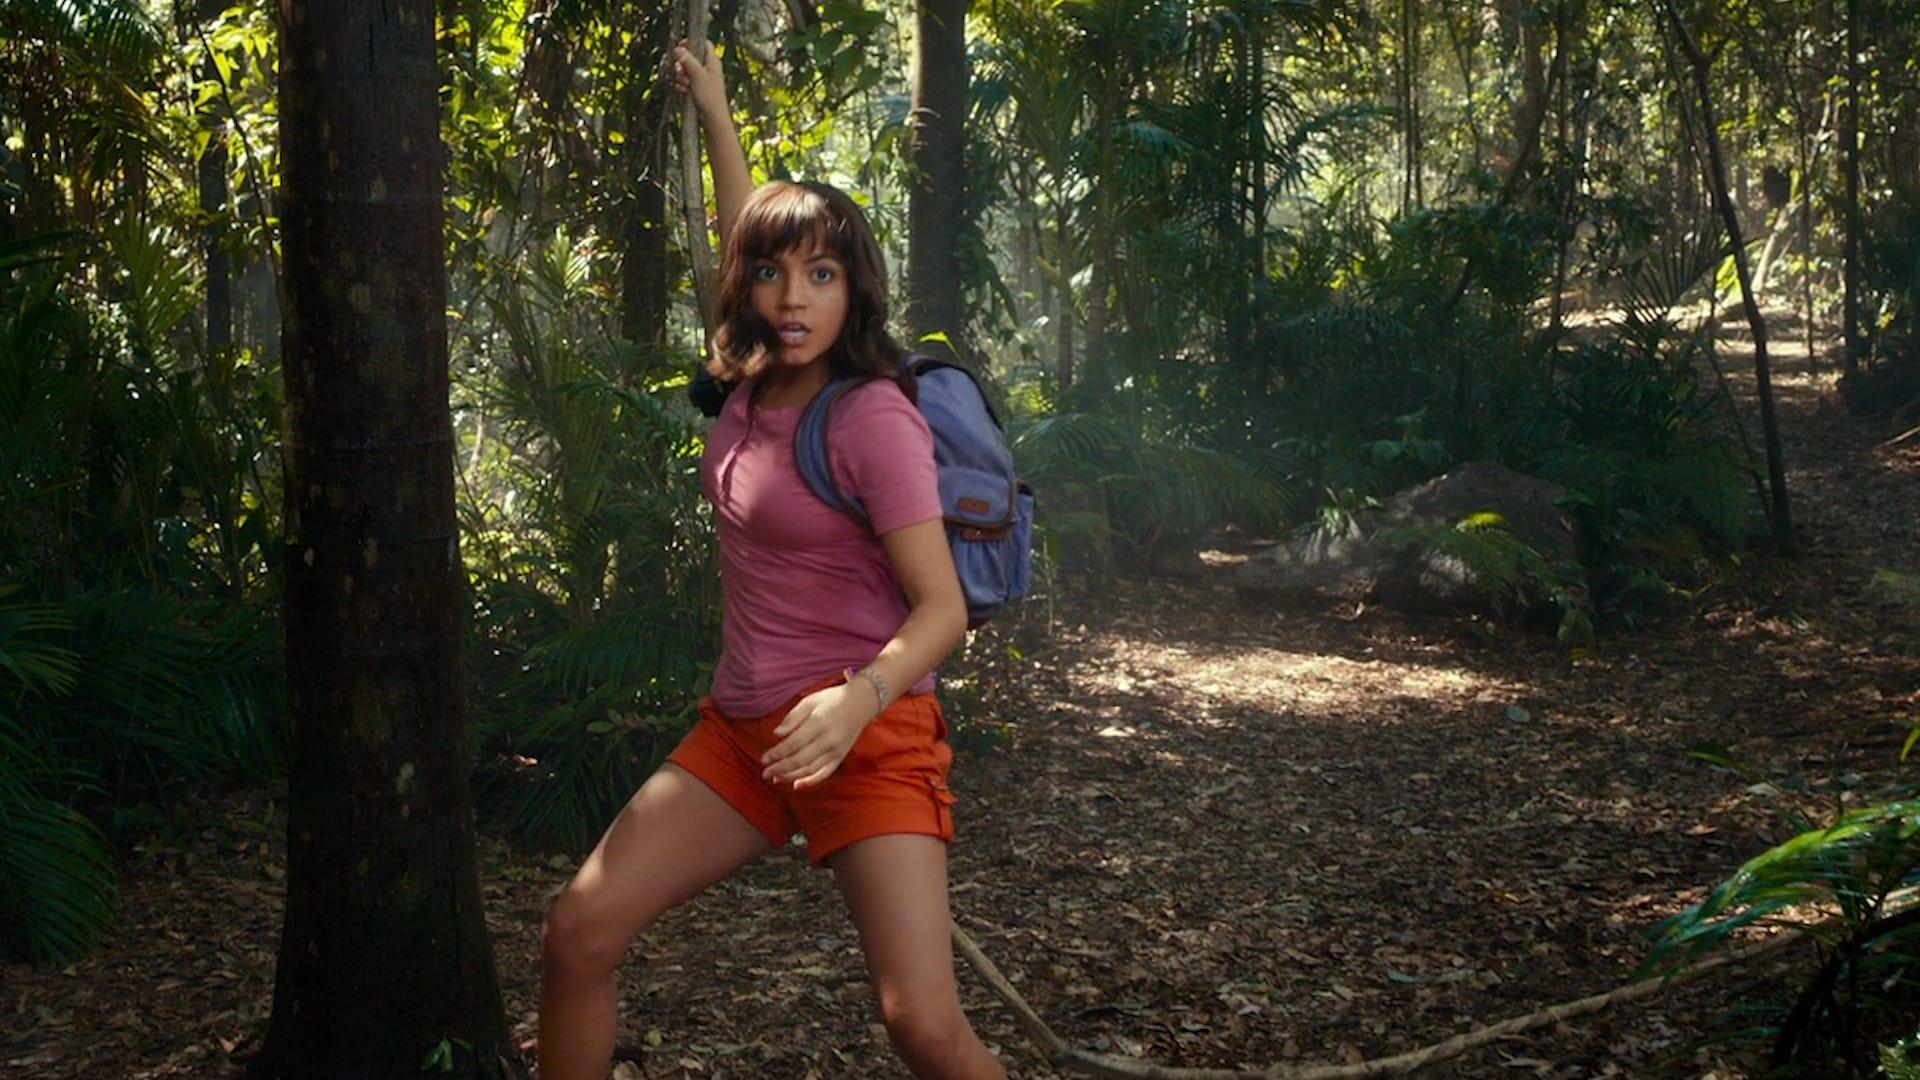 Dora the Explorer comes to life in 'Dora and the Lost City of Gold